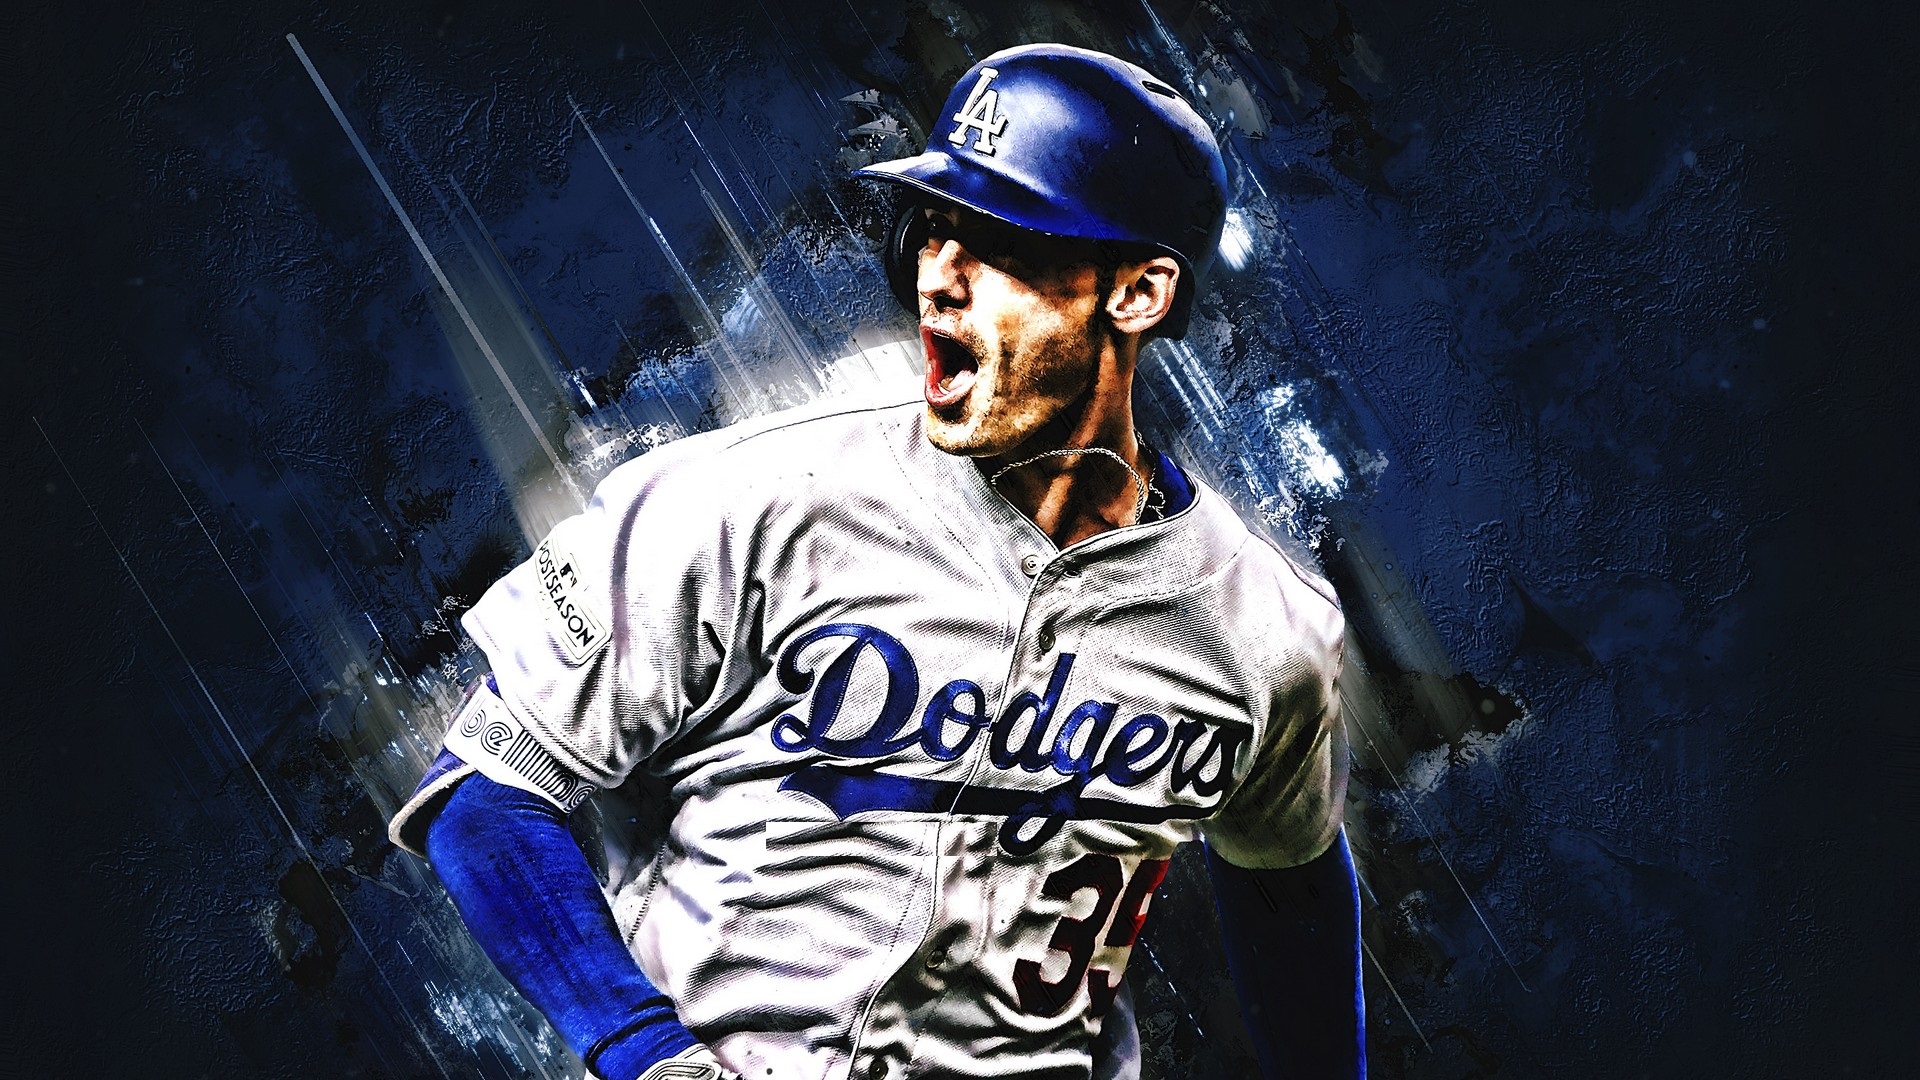 Los Angeles Dodgers MLB Wallpaper For PC With high-resolution 1920X1080 pixel. You can use this wallpaper for Mac Desktop Wallpaper, Laptop Screensavers, Android Wallpapers, Tablet or iPhone Home Screen and another mobile phone device